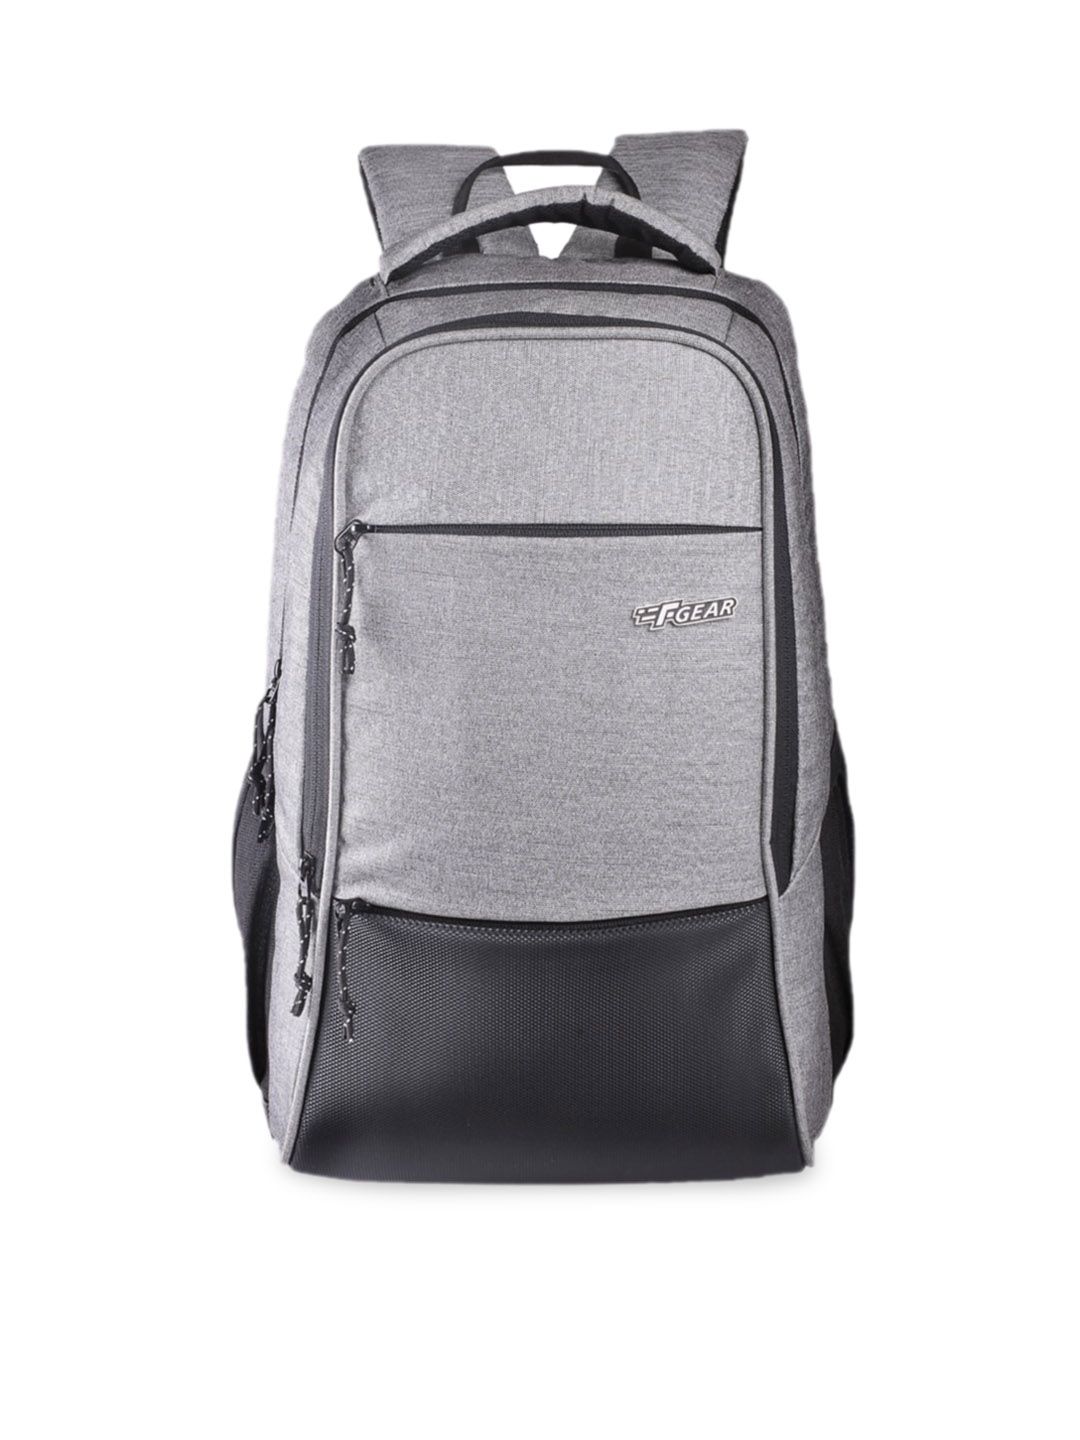 F Gear Unisex Grey & Black Solid Backpack Price in India